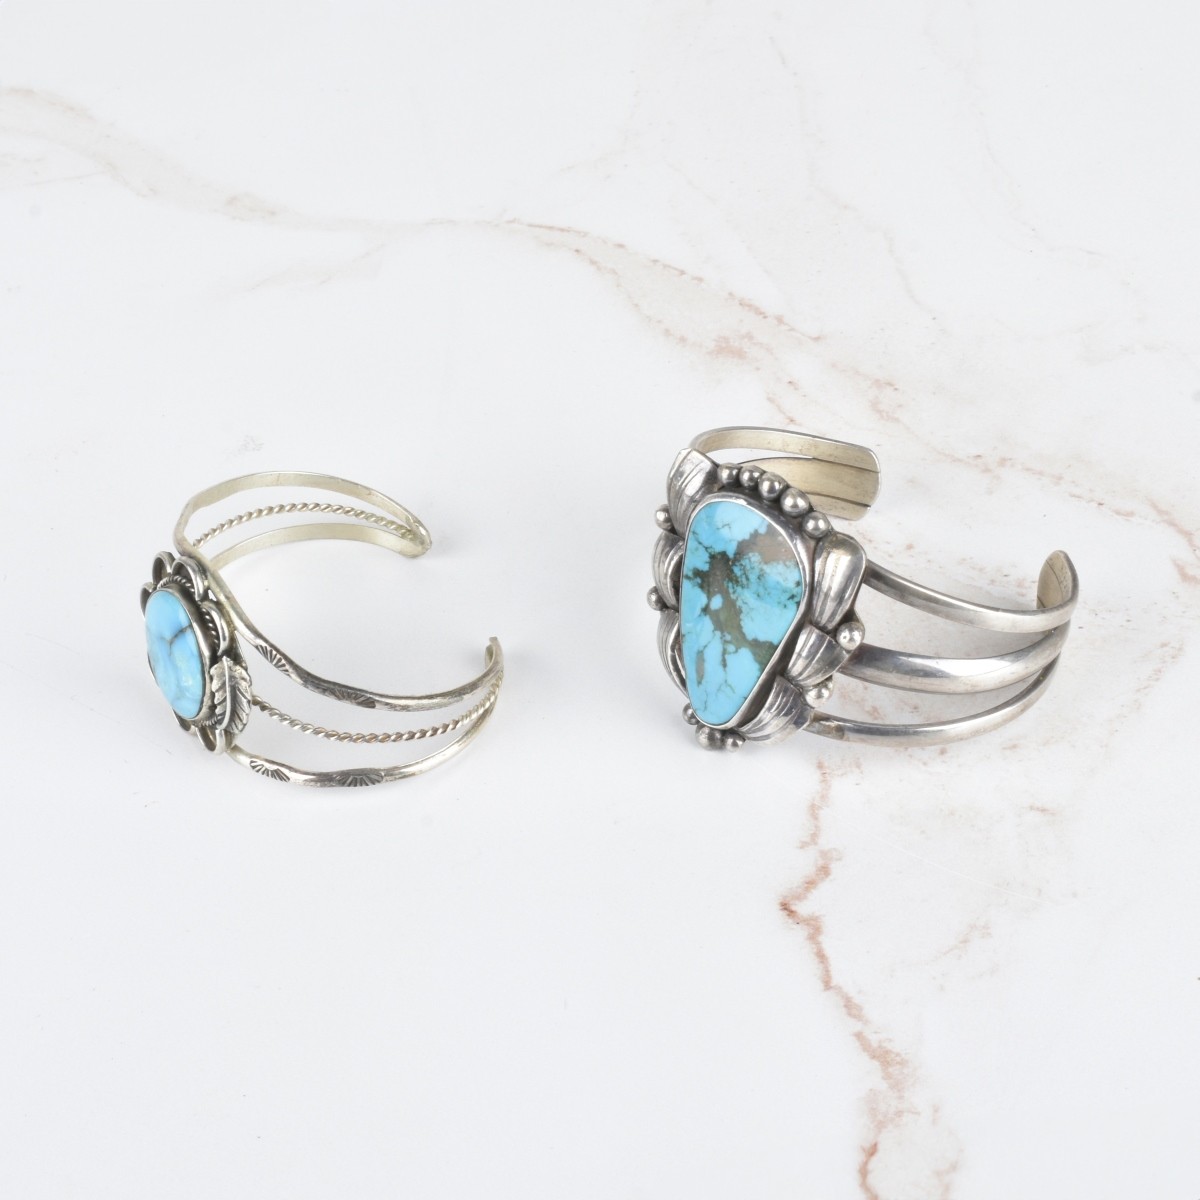 Turquoise and Silver Cuff Bangles